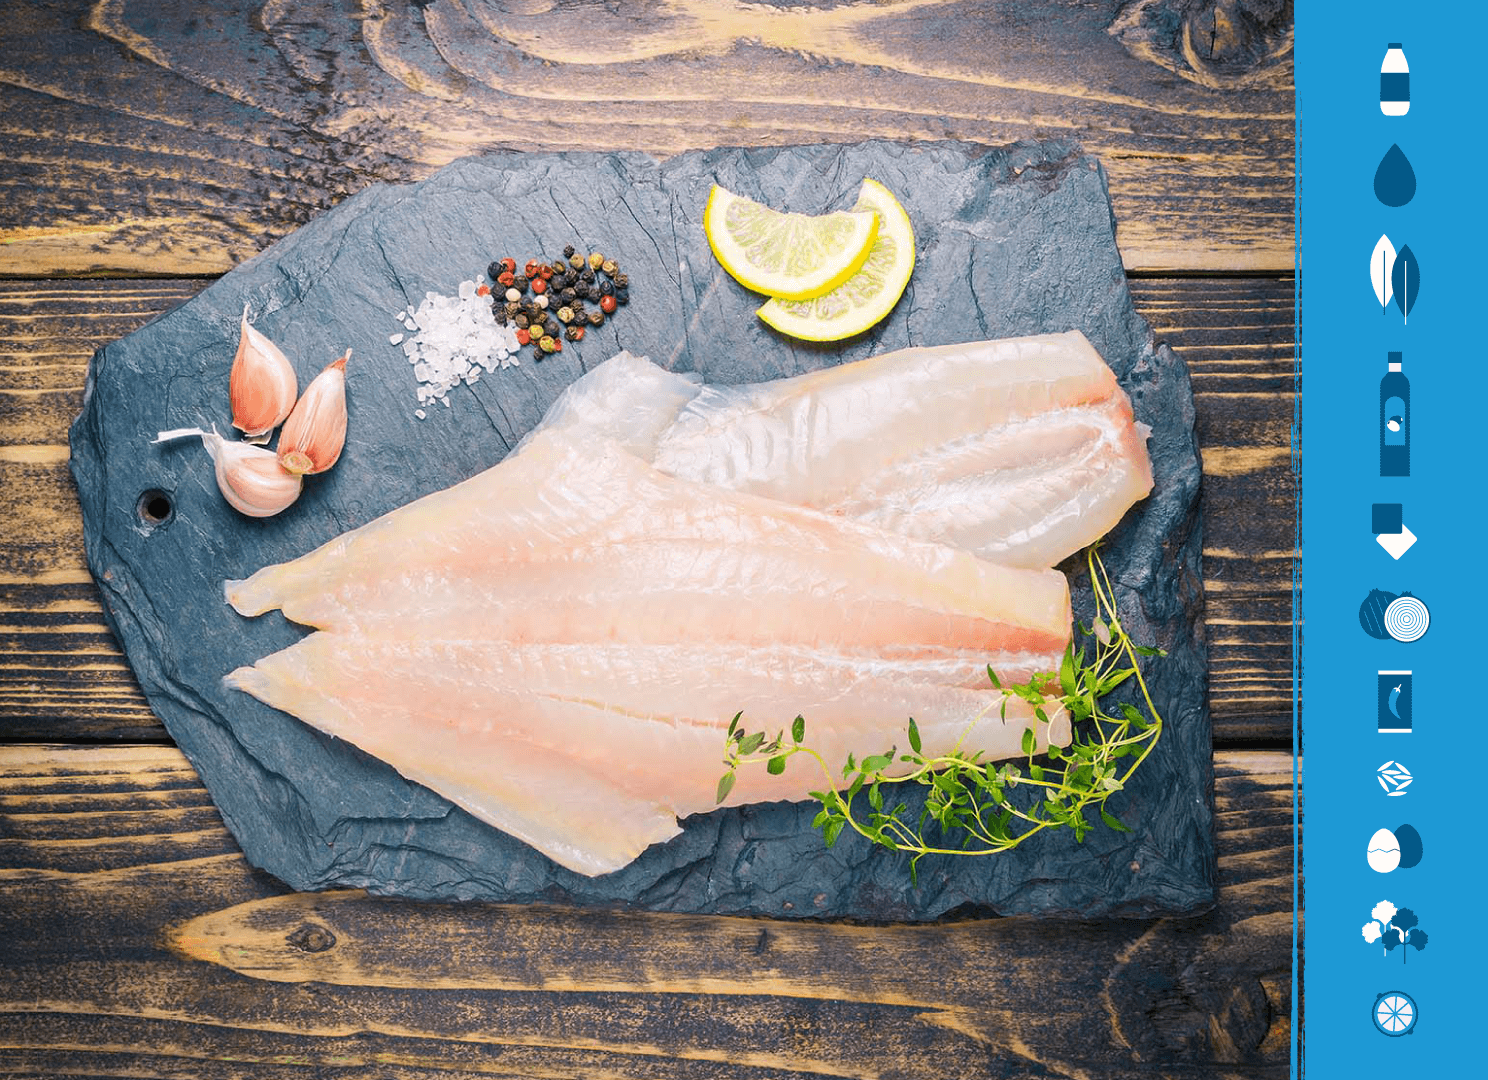 Haddock fillets on a slate background next to illustrations of the ingredients needed to make Kedgeree